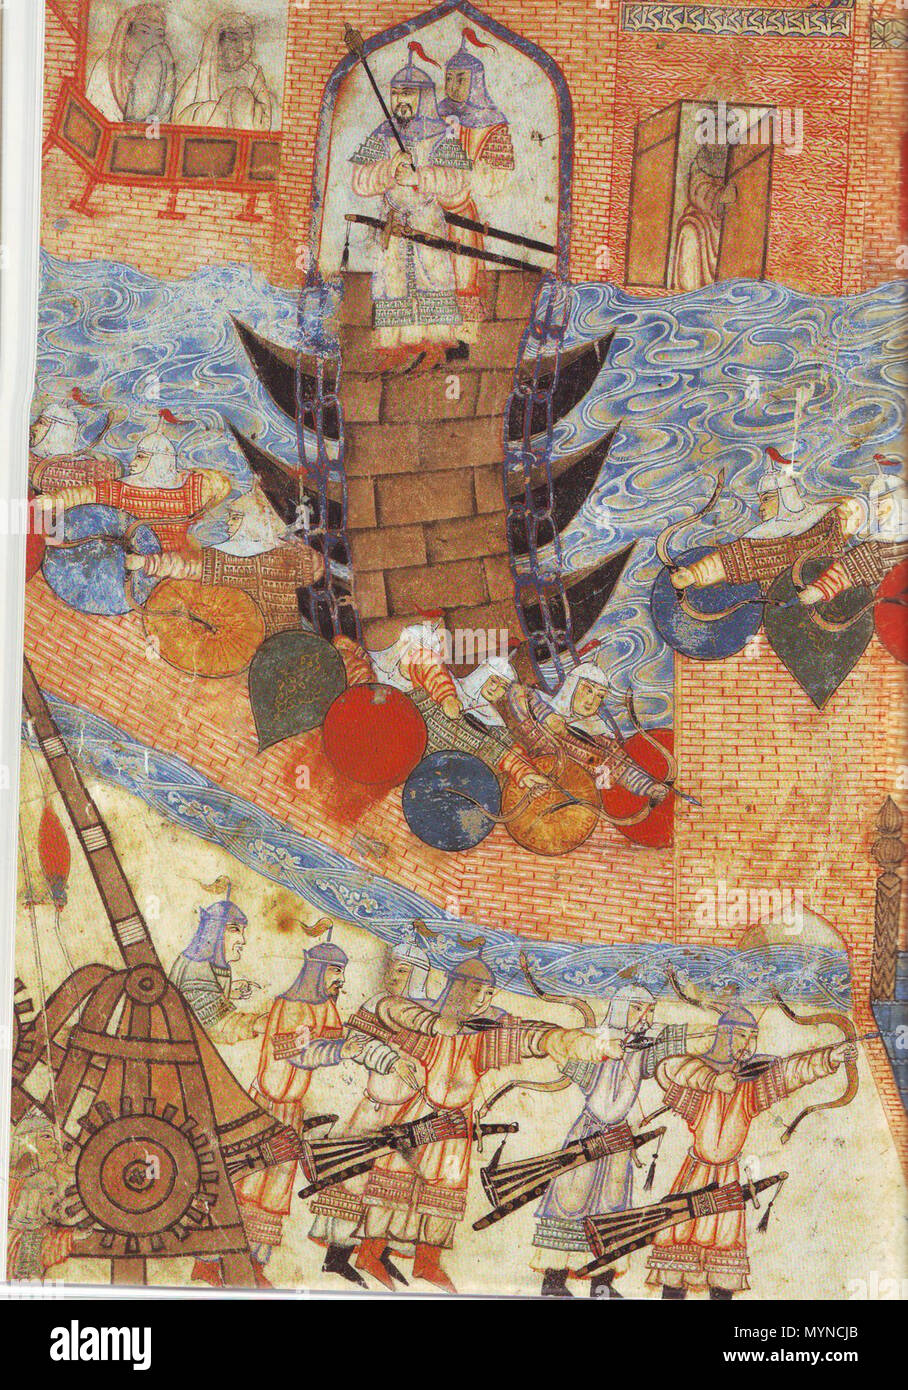 416 Persian painting of Hülegü’s army attacking city with siege engine Stock Photo